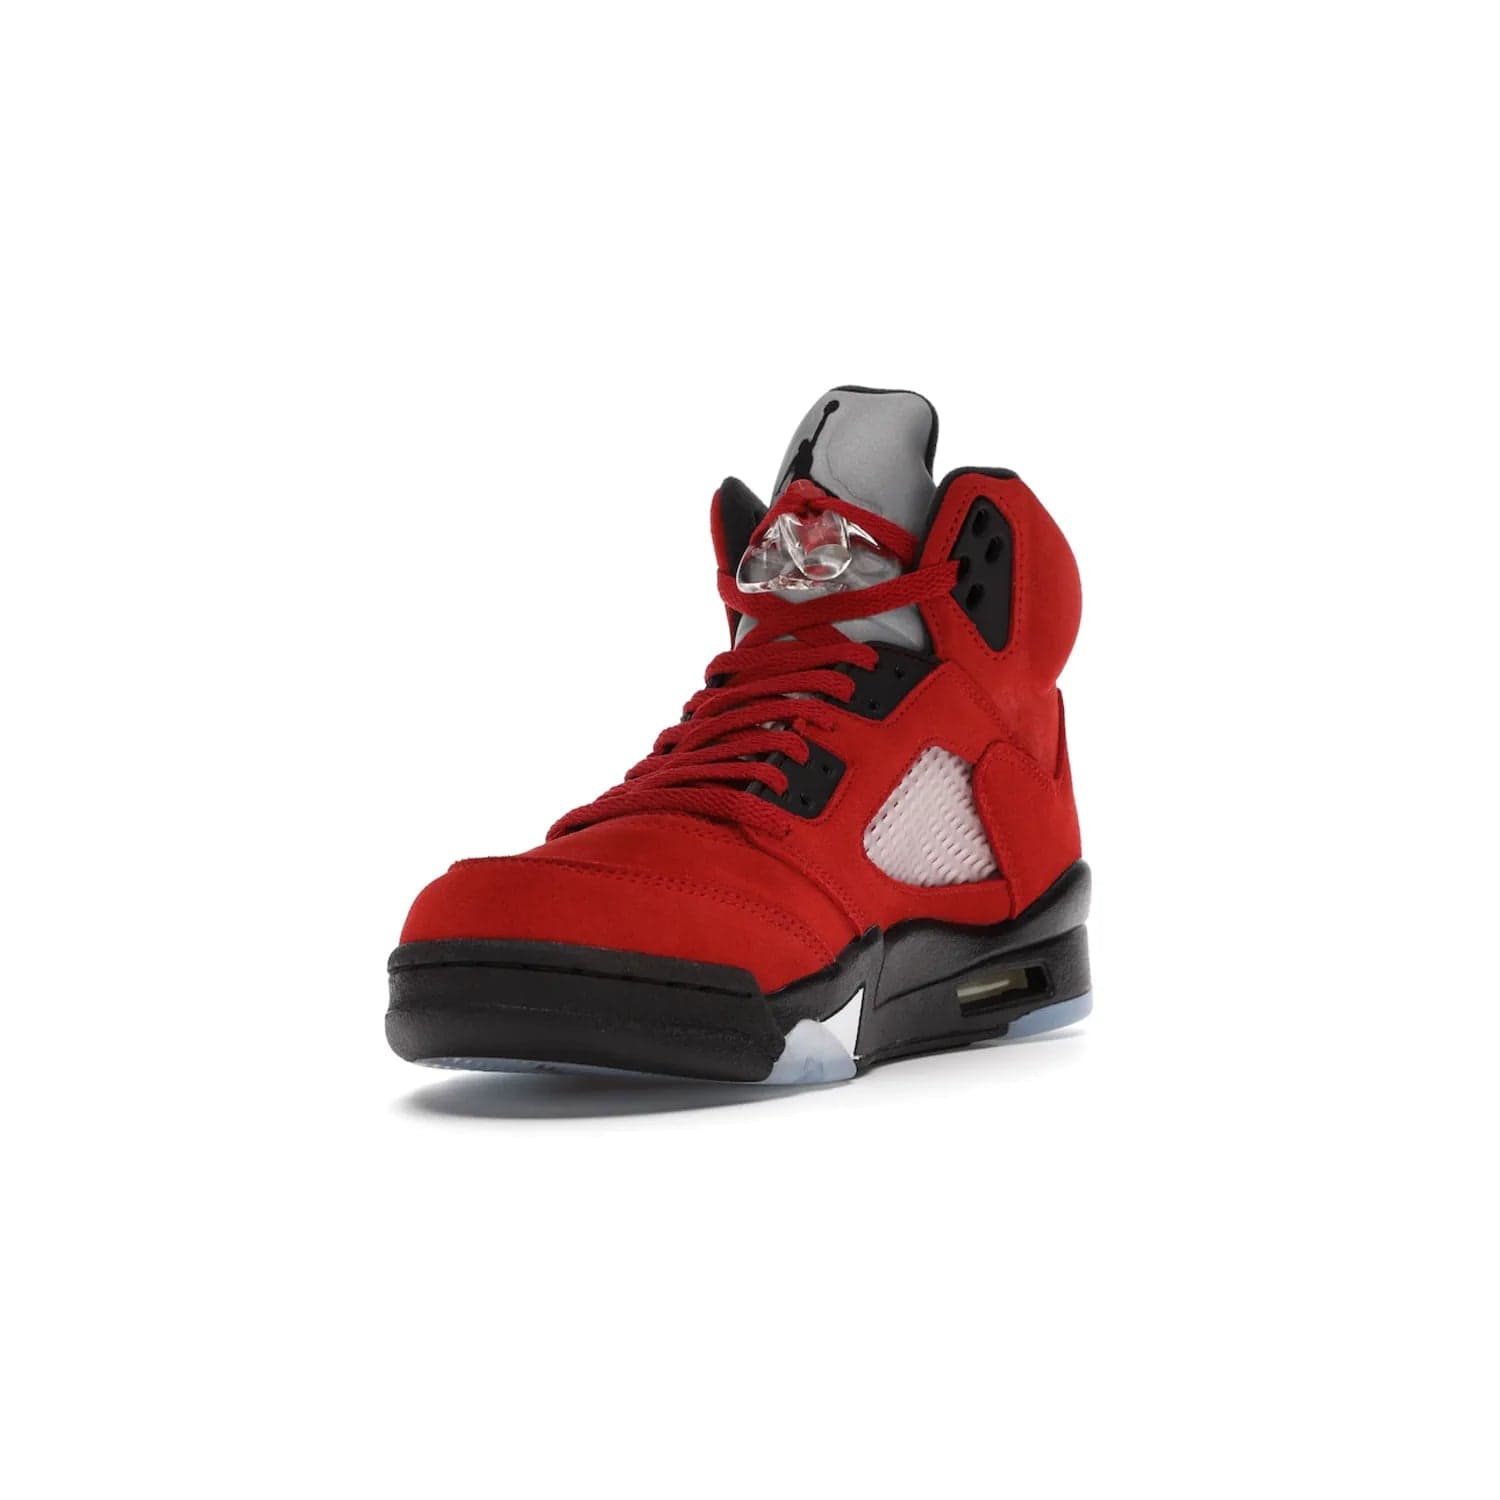 Jordan 5 Retro Raging Bull Red (2021) - Image 13 - Only at www.BallersClubKickz.com - Get ready for the 2021 stand-alone release of the Air Jordan 5 Raging Bulls! This all-suede upper combines luxe details like a Jumpman logo, red & black "23" embroidery and shark tooth detailing, atop a black midsole. Don't miss out - release date in April 2021 for $190.